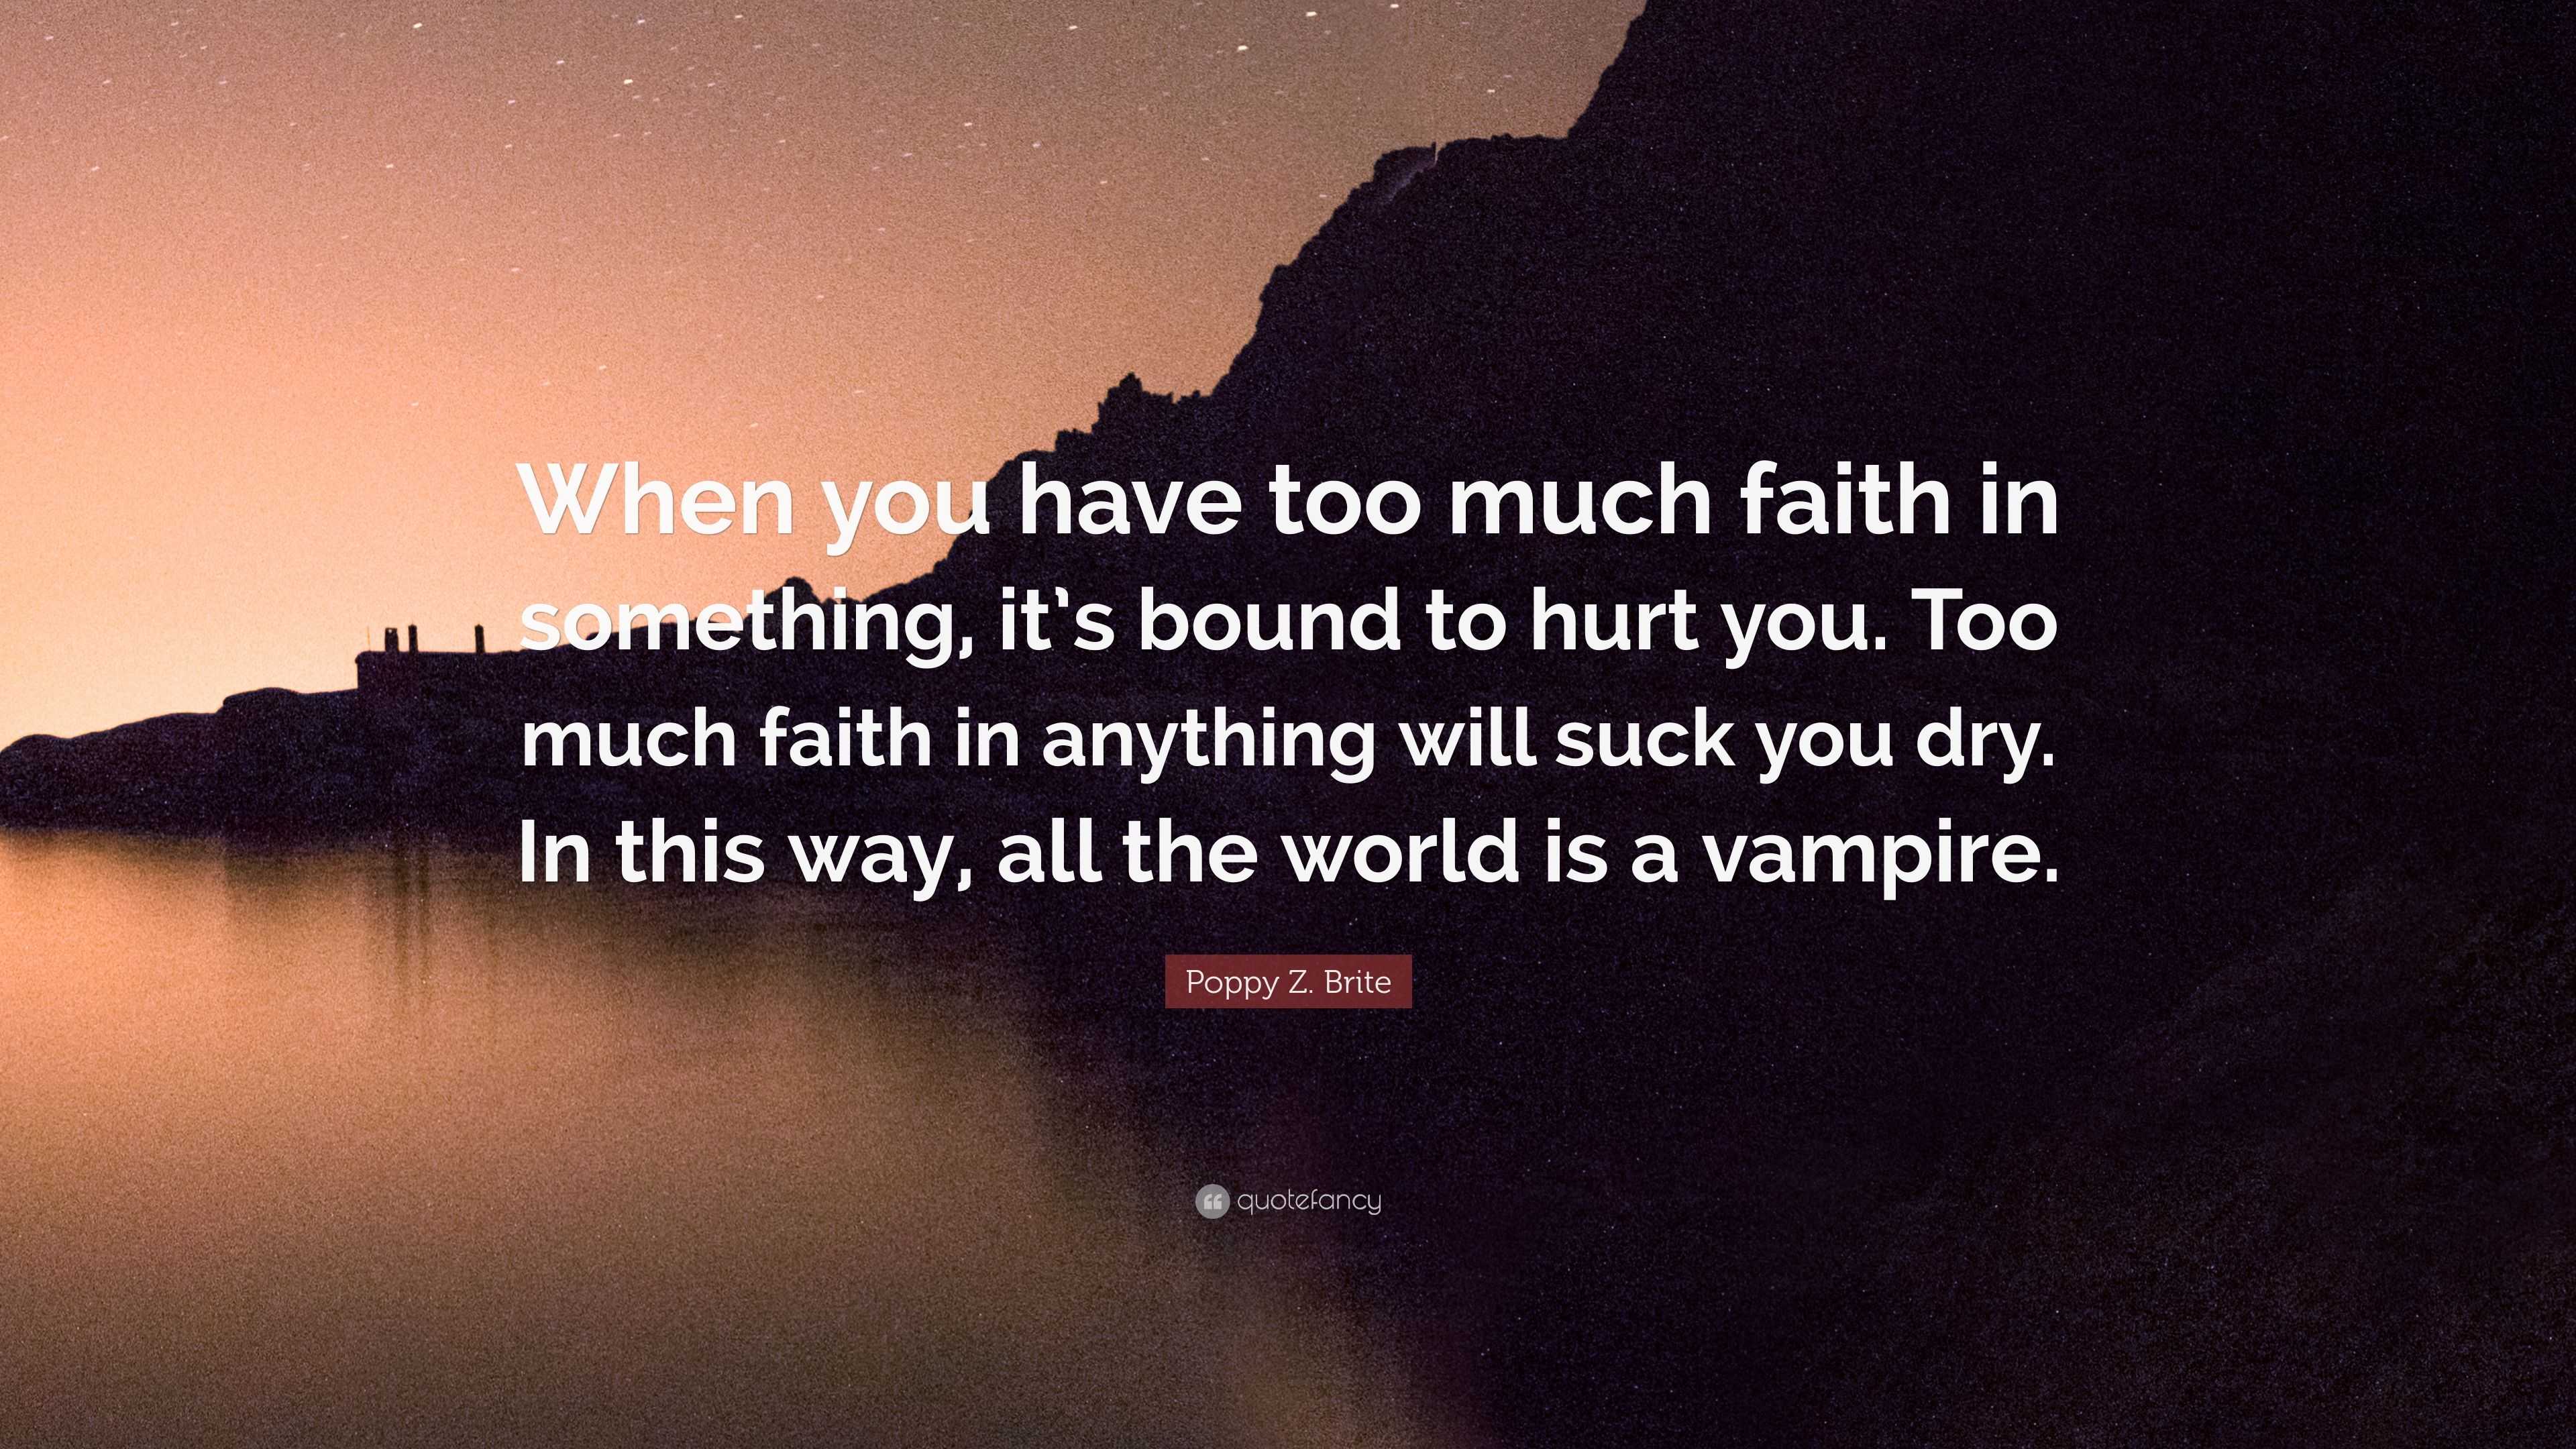 Poppy Z Brite Quote “When you have too much faith in something